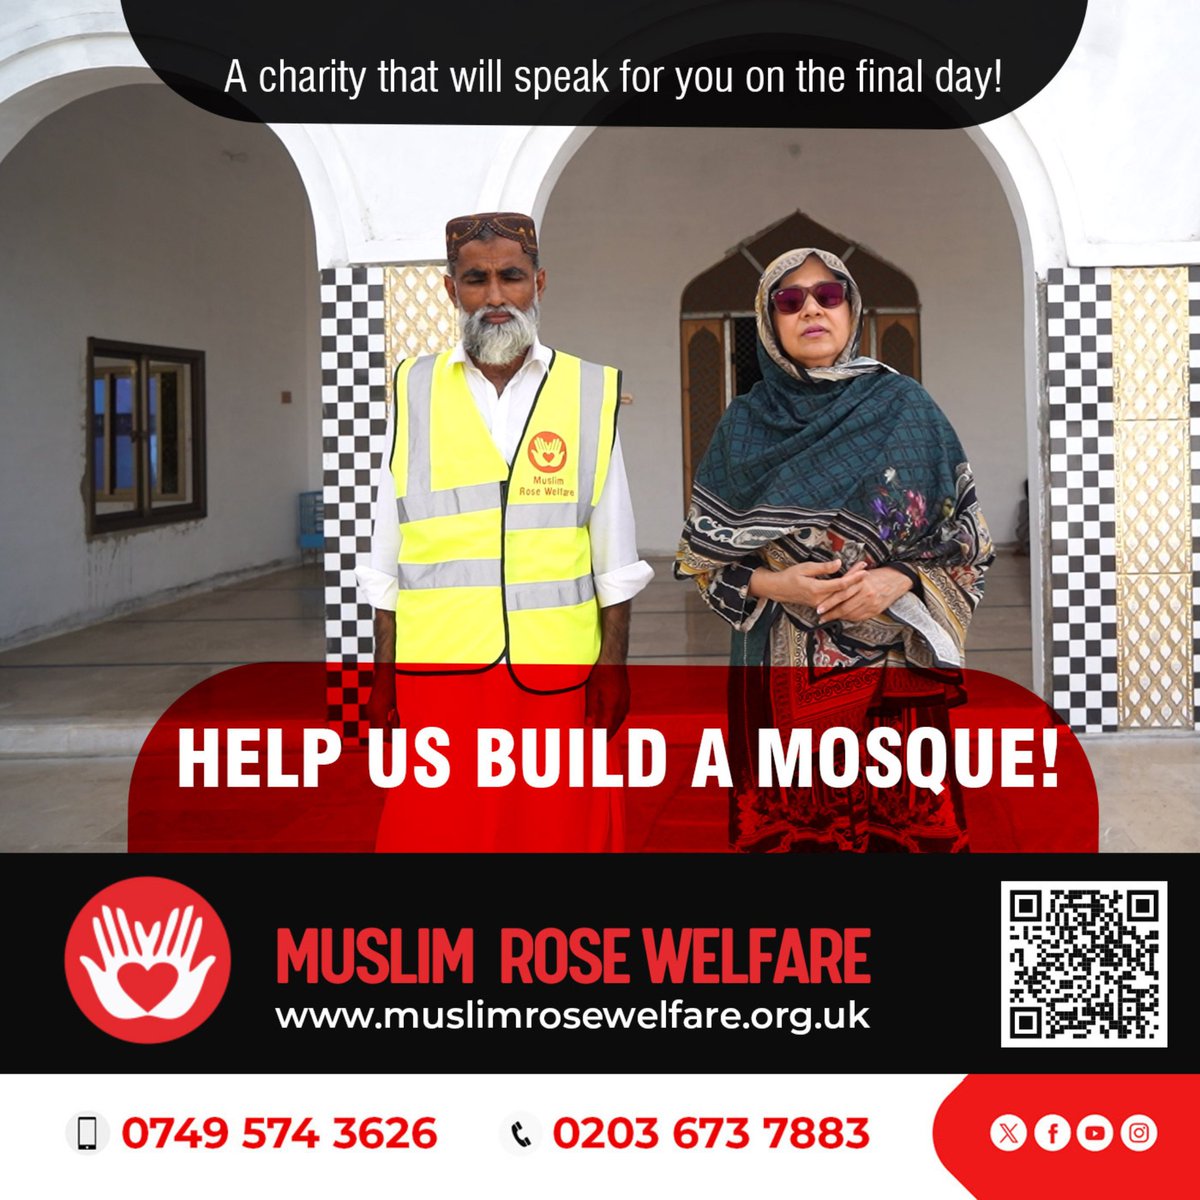 Join us in leaving a legacy of worship for generations to come.

Donate Today!
muslimrosewelfare.org.uk/projects/build…

Bank Detail:
Muslim Rose Welfare
Barclays Bank
Ac 83733157
Sort code 20-35-93

#Mosque #Muslim #donateforagoodcause #CaringCommunity #donateforacause #donationsappreciated